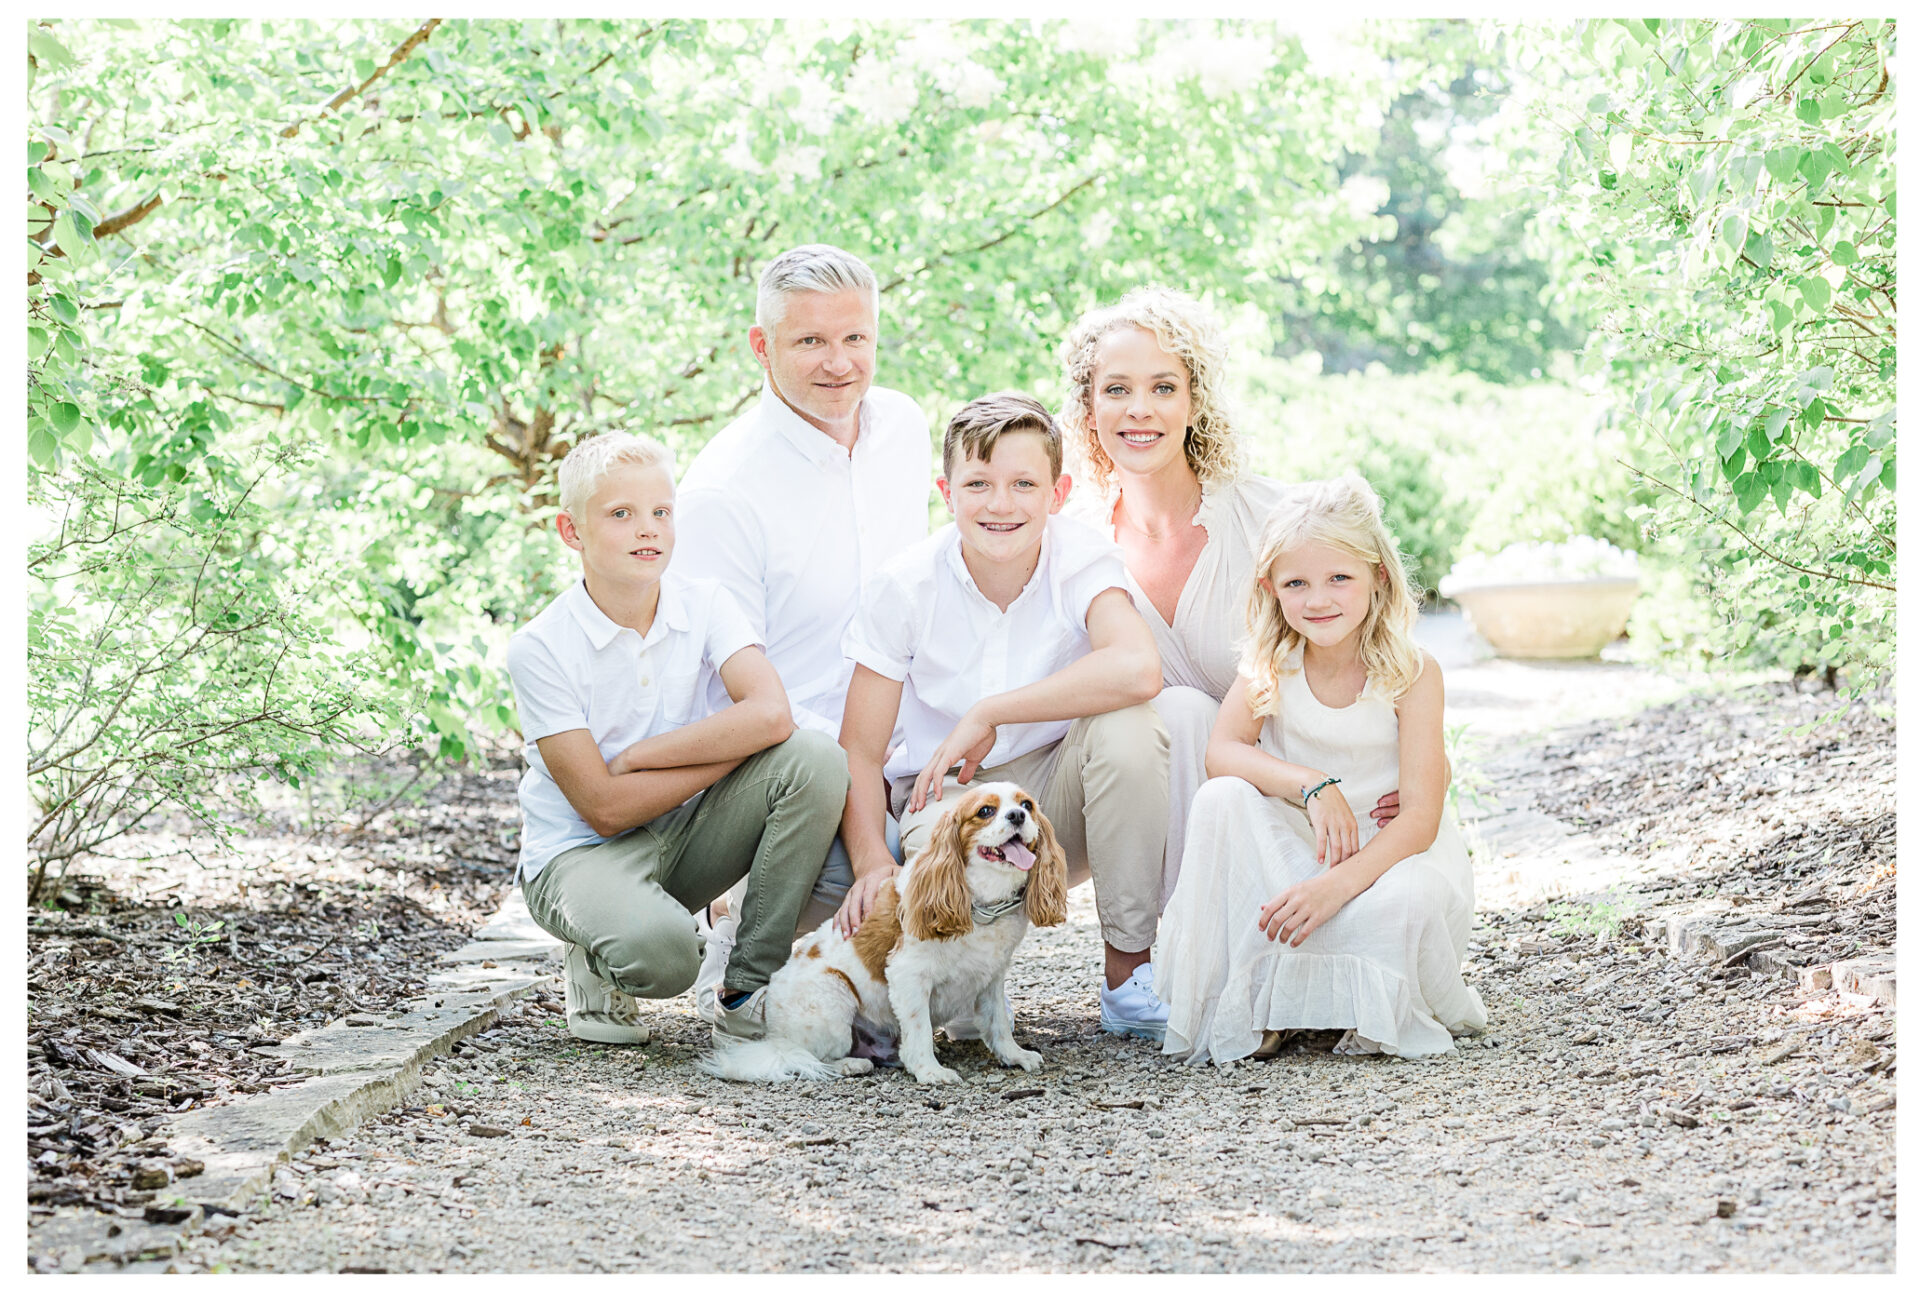 Cincinnati Columbus Dayton OH Family Photographer | Winter Freire Photography | Light and Airy Family Session Dayton, Ohio Photographers | Organic Ohio Family Session with Dog